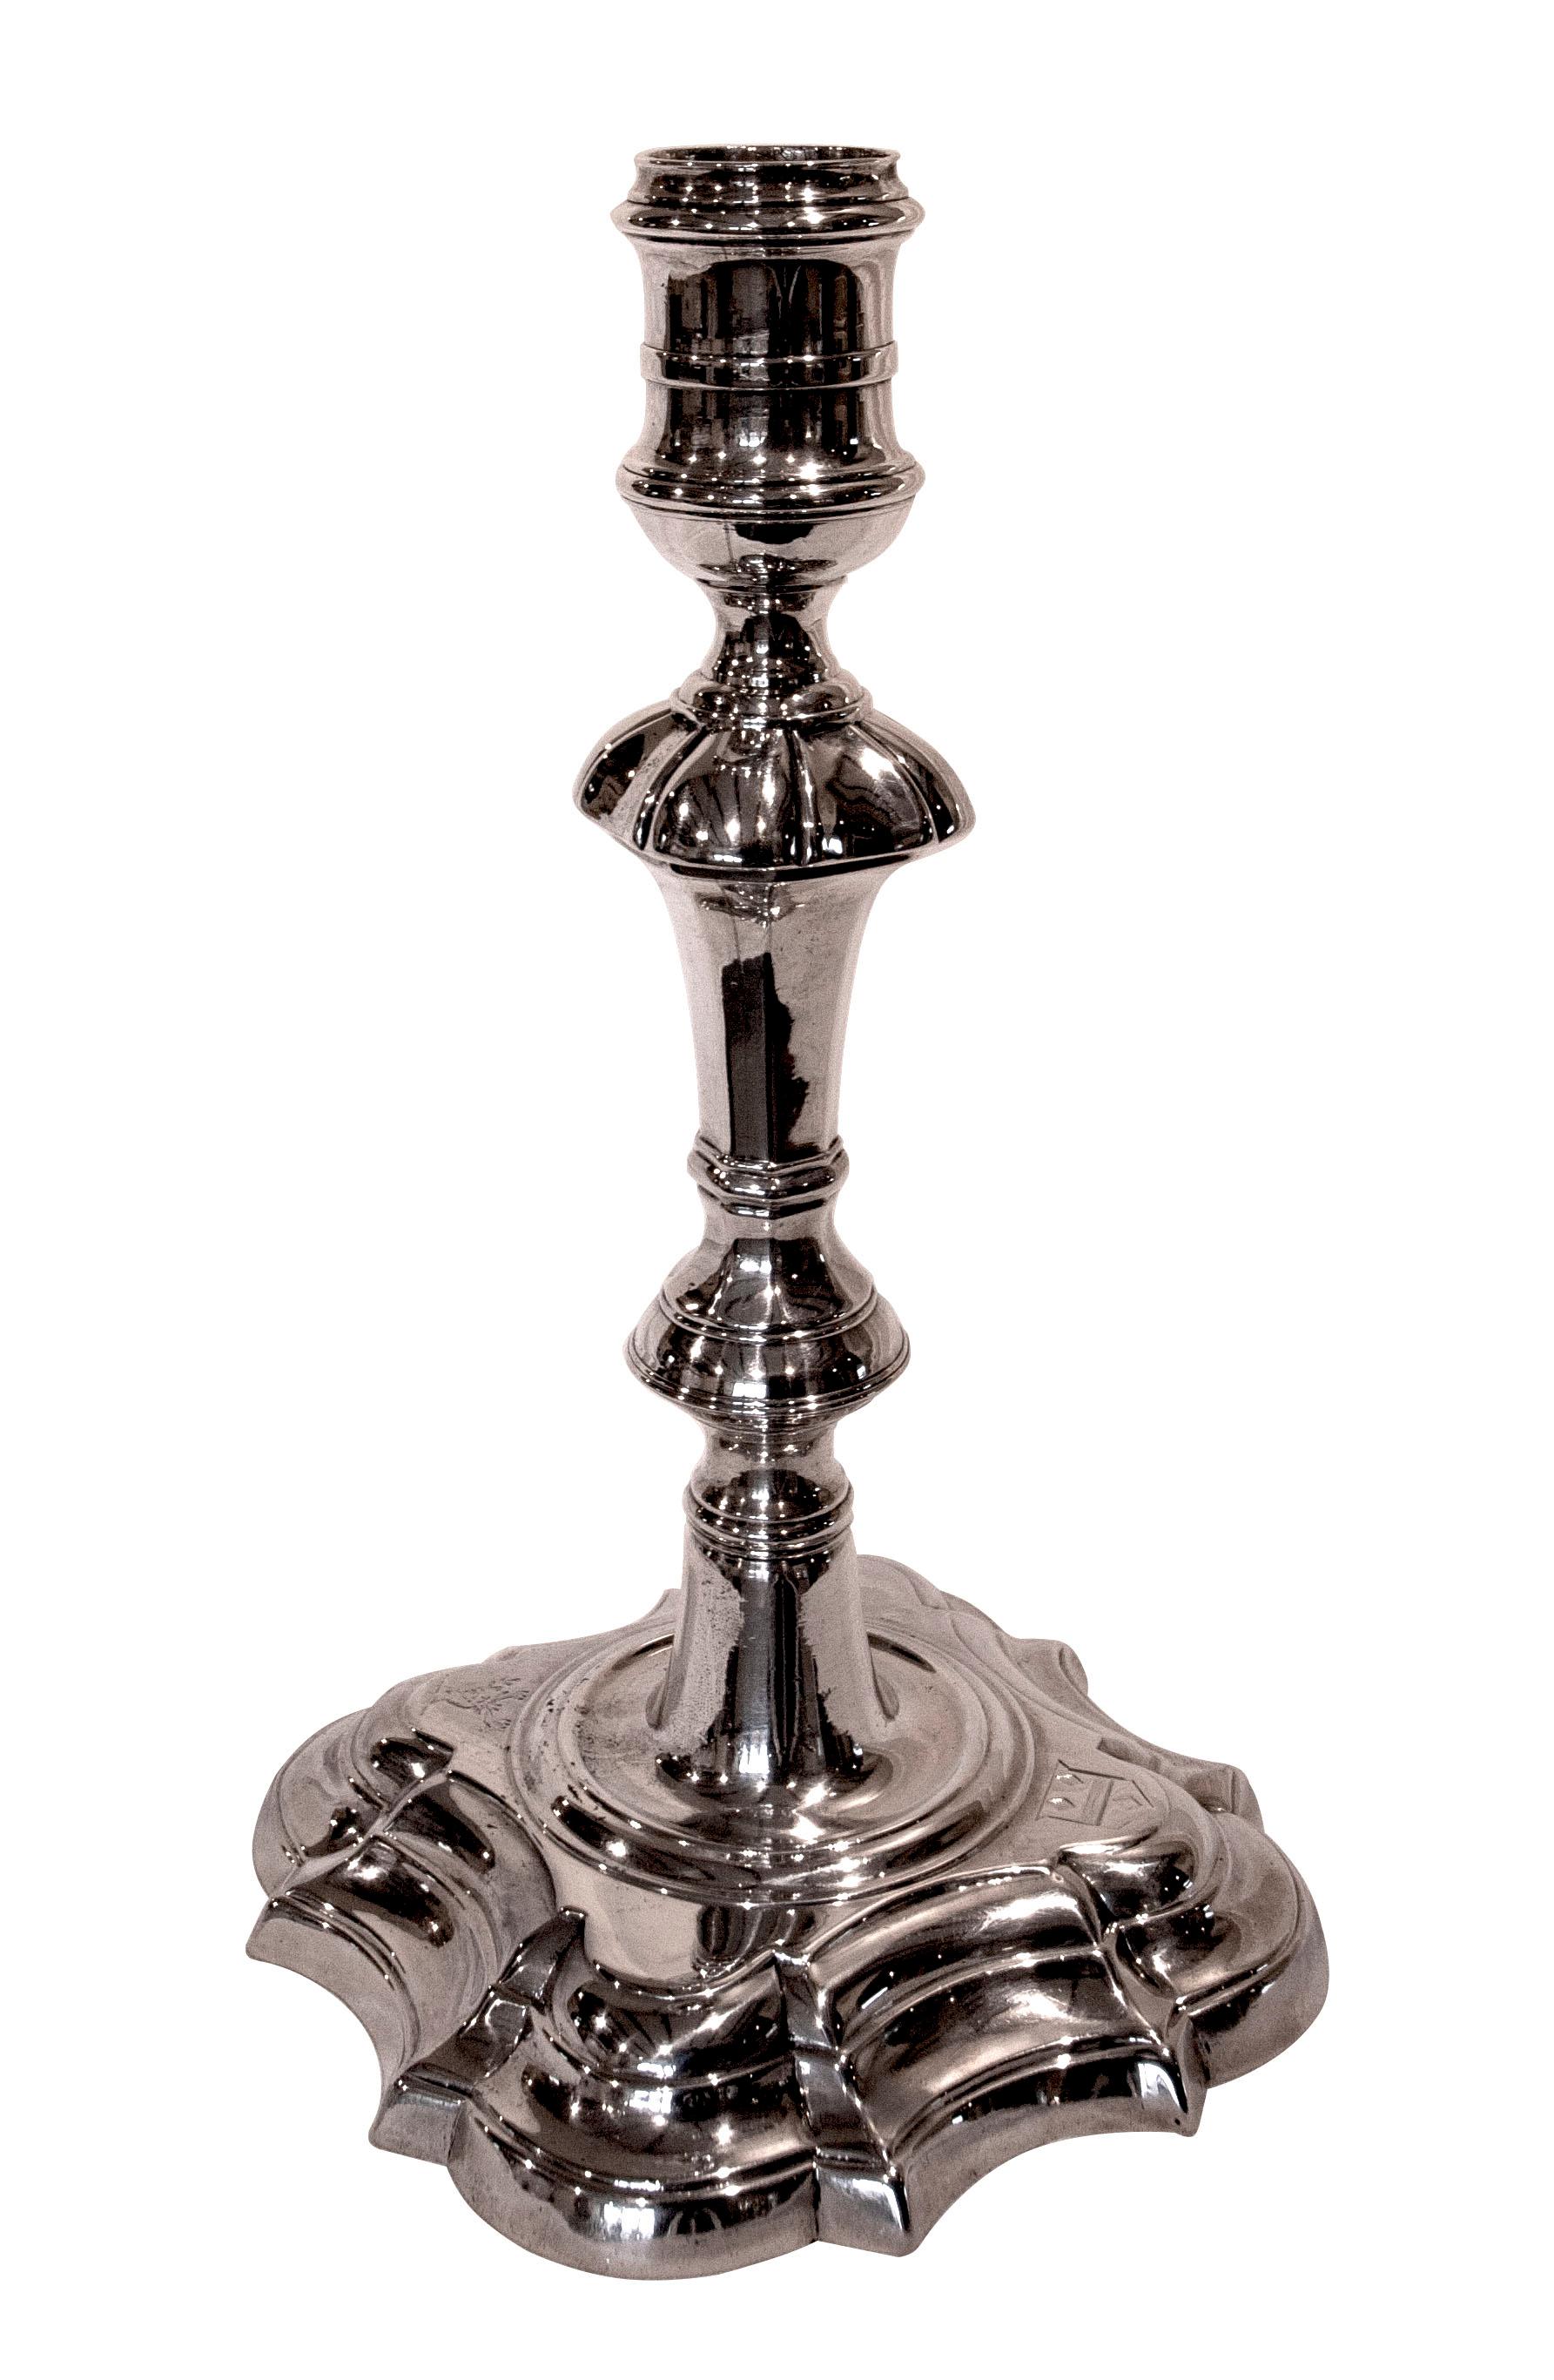 A set of four Georgian silver cast candlesticks each engraved with stags head crest and coat of arms.